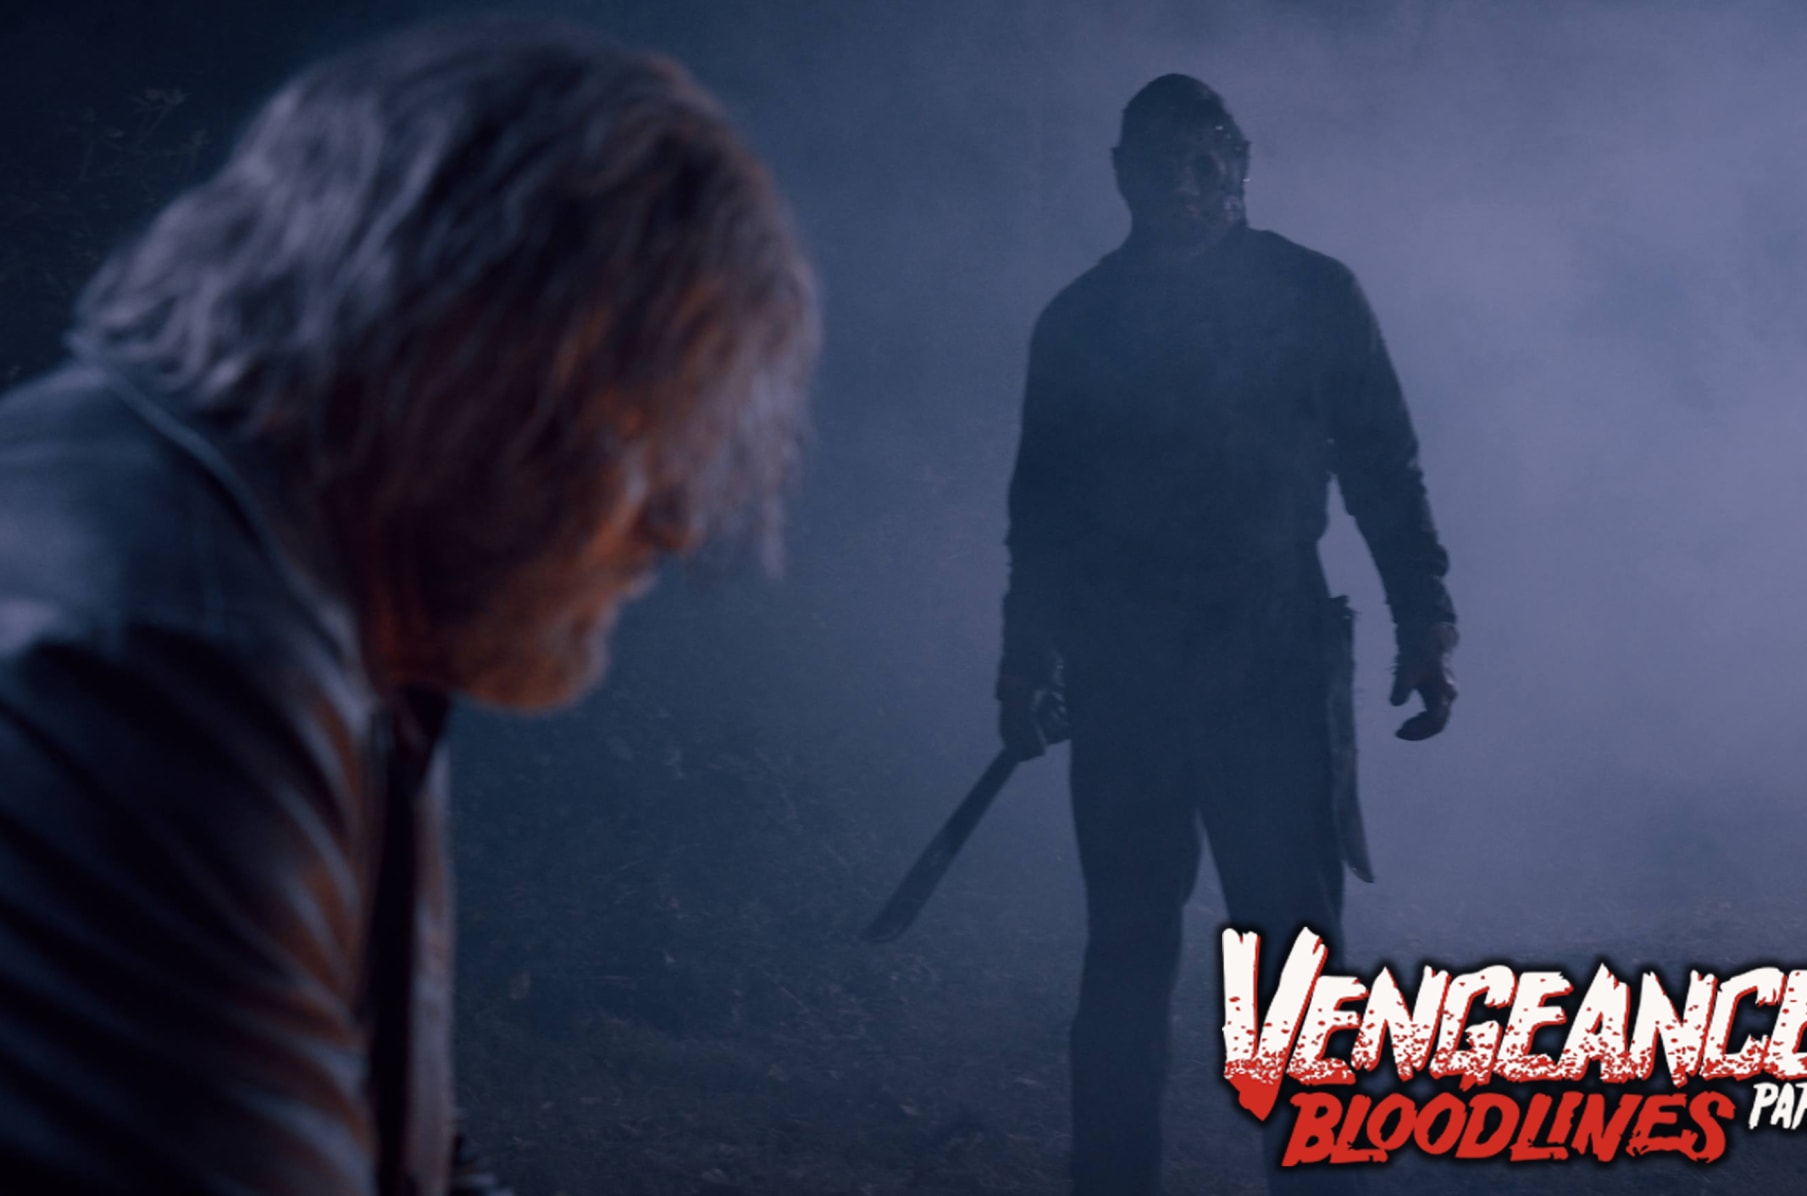 Friday the 13th Vengeance